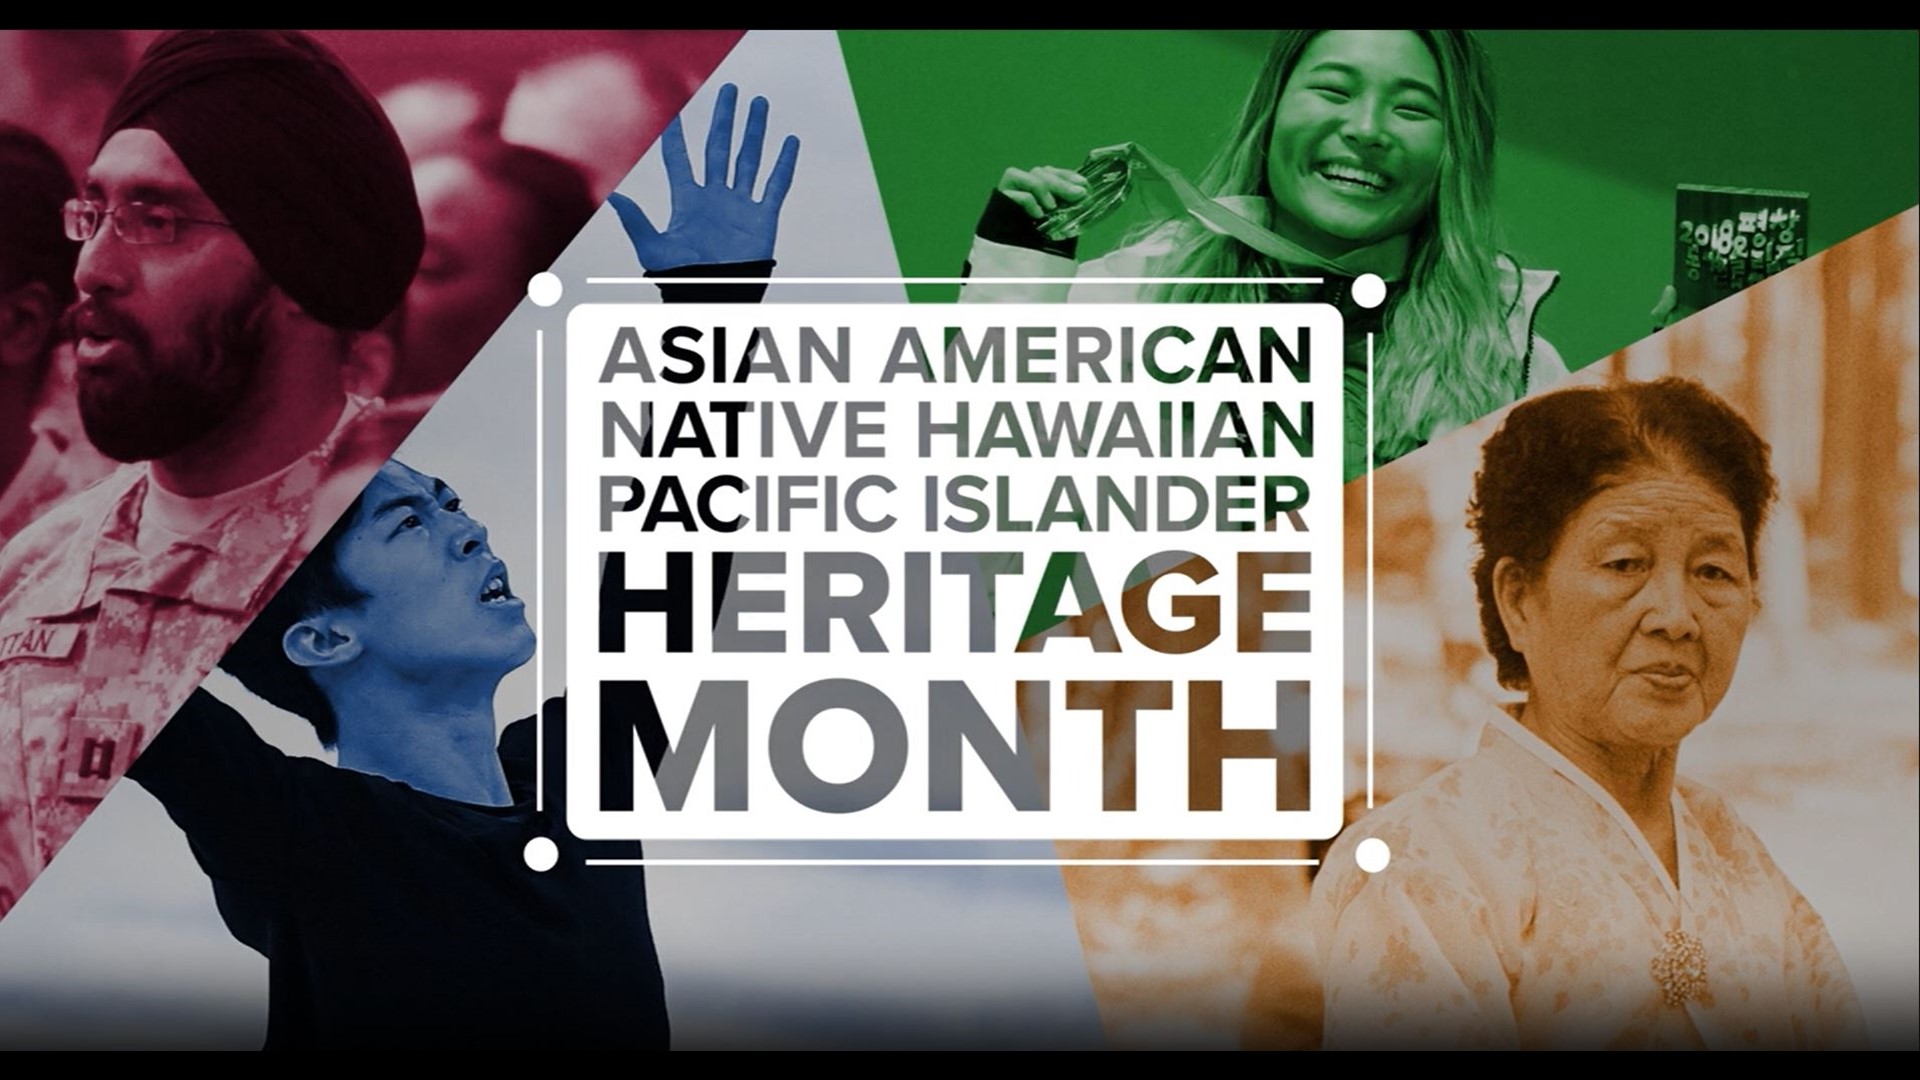 A closer look at Asian American, Native Hawaiian and Pacific Islander heritage month. The impacts and contributions seen across the US from this growing community.